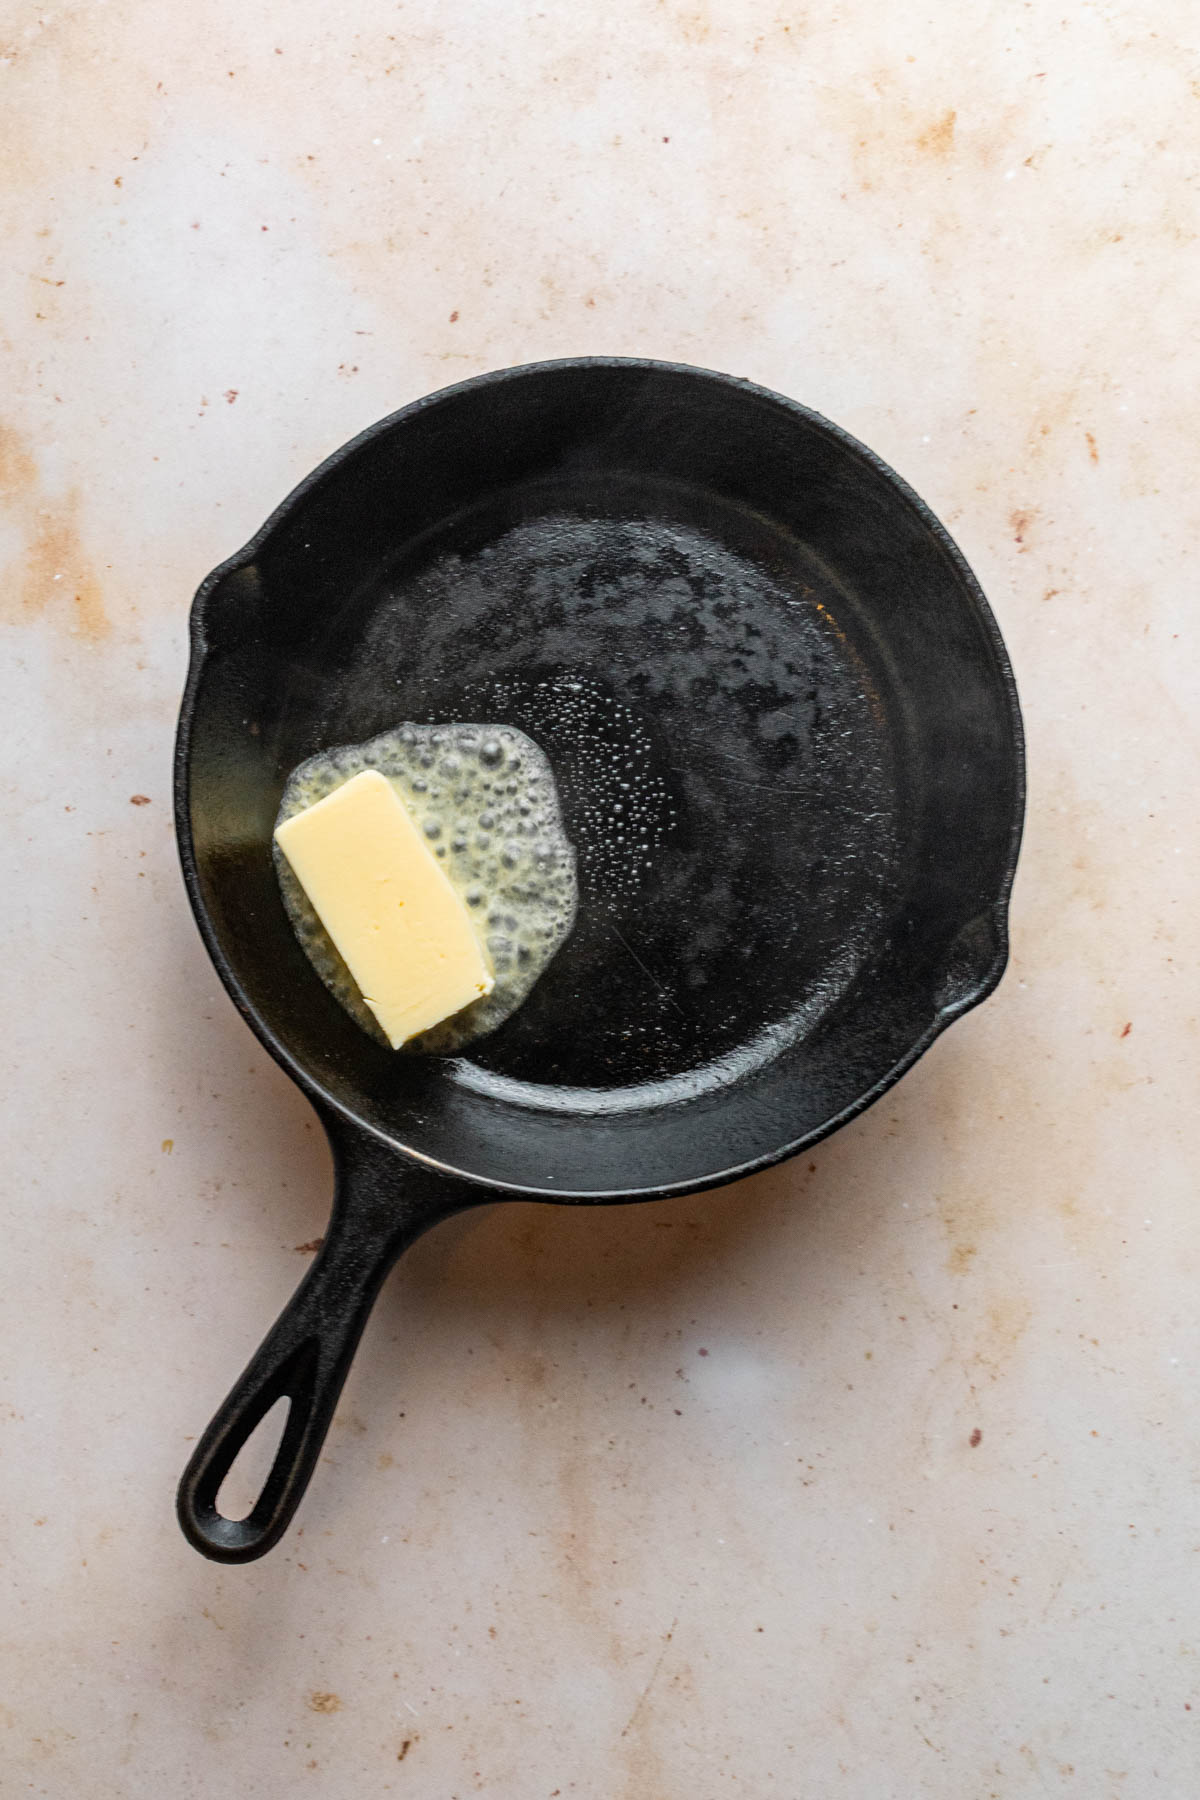 Butter melting and sizzling in a cast iron skillet.